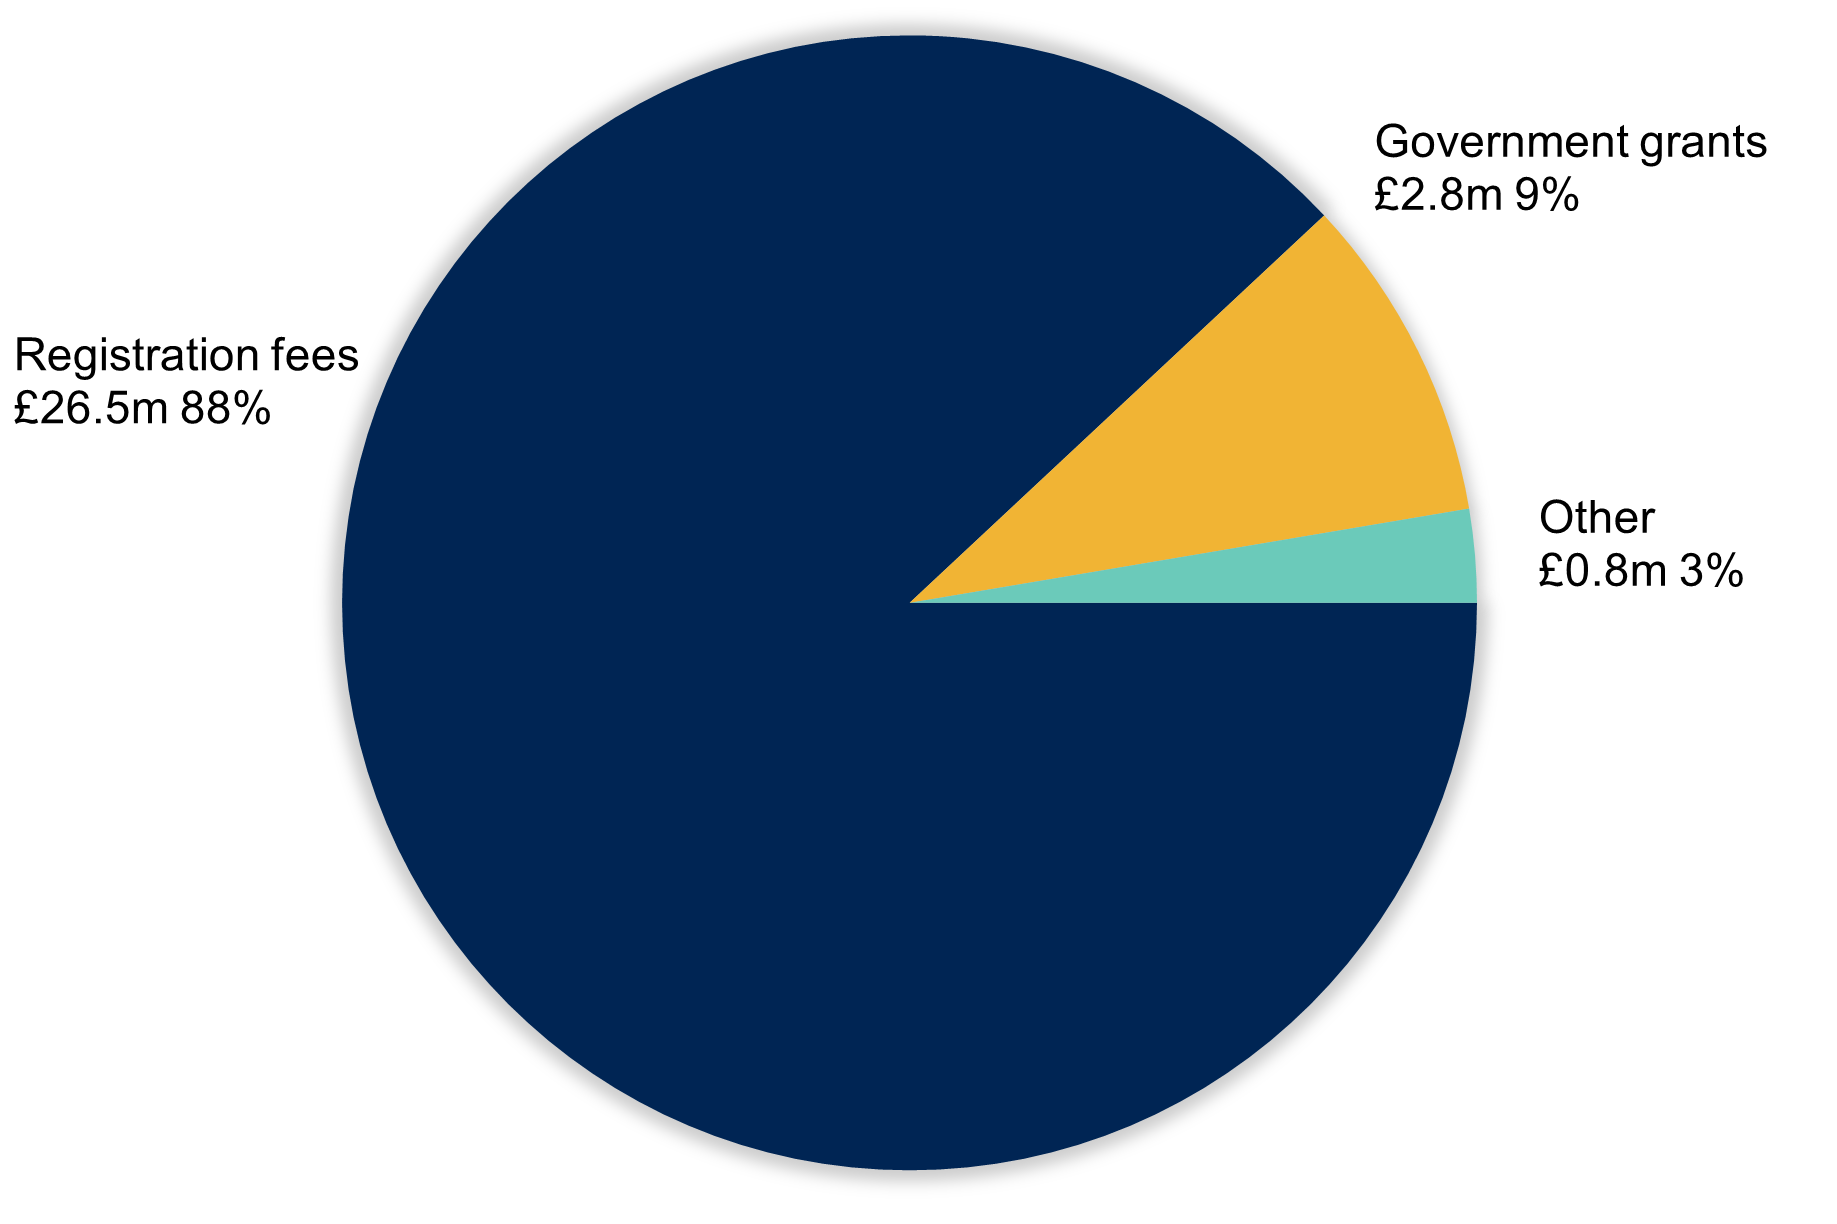 Figure 1 shows that of our income budget of £30.1 million, we receive: £26.5 million (88%) from registration fees; £2.8 million (9%) from government grants; £0.8 million (3%) from other sources.